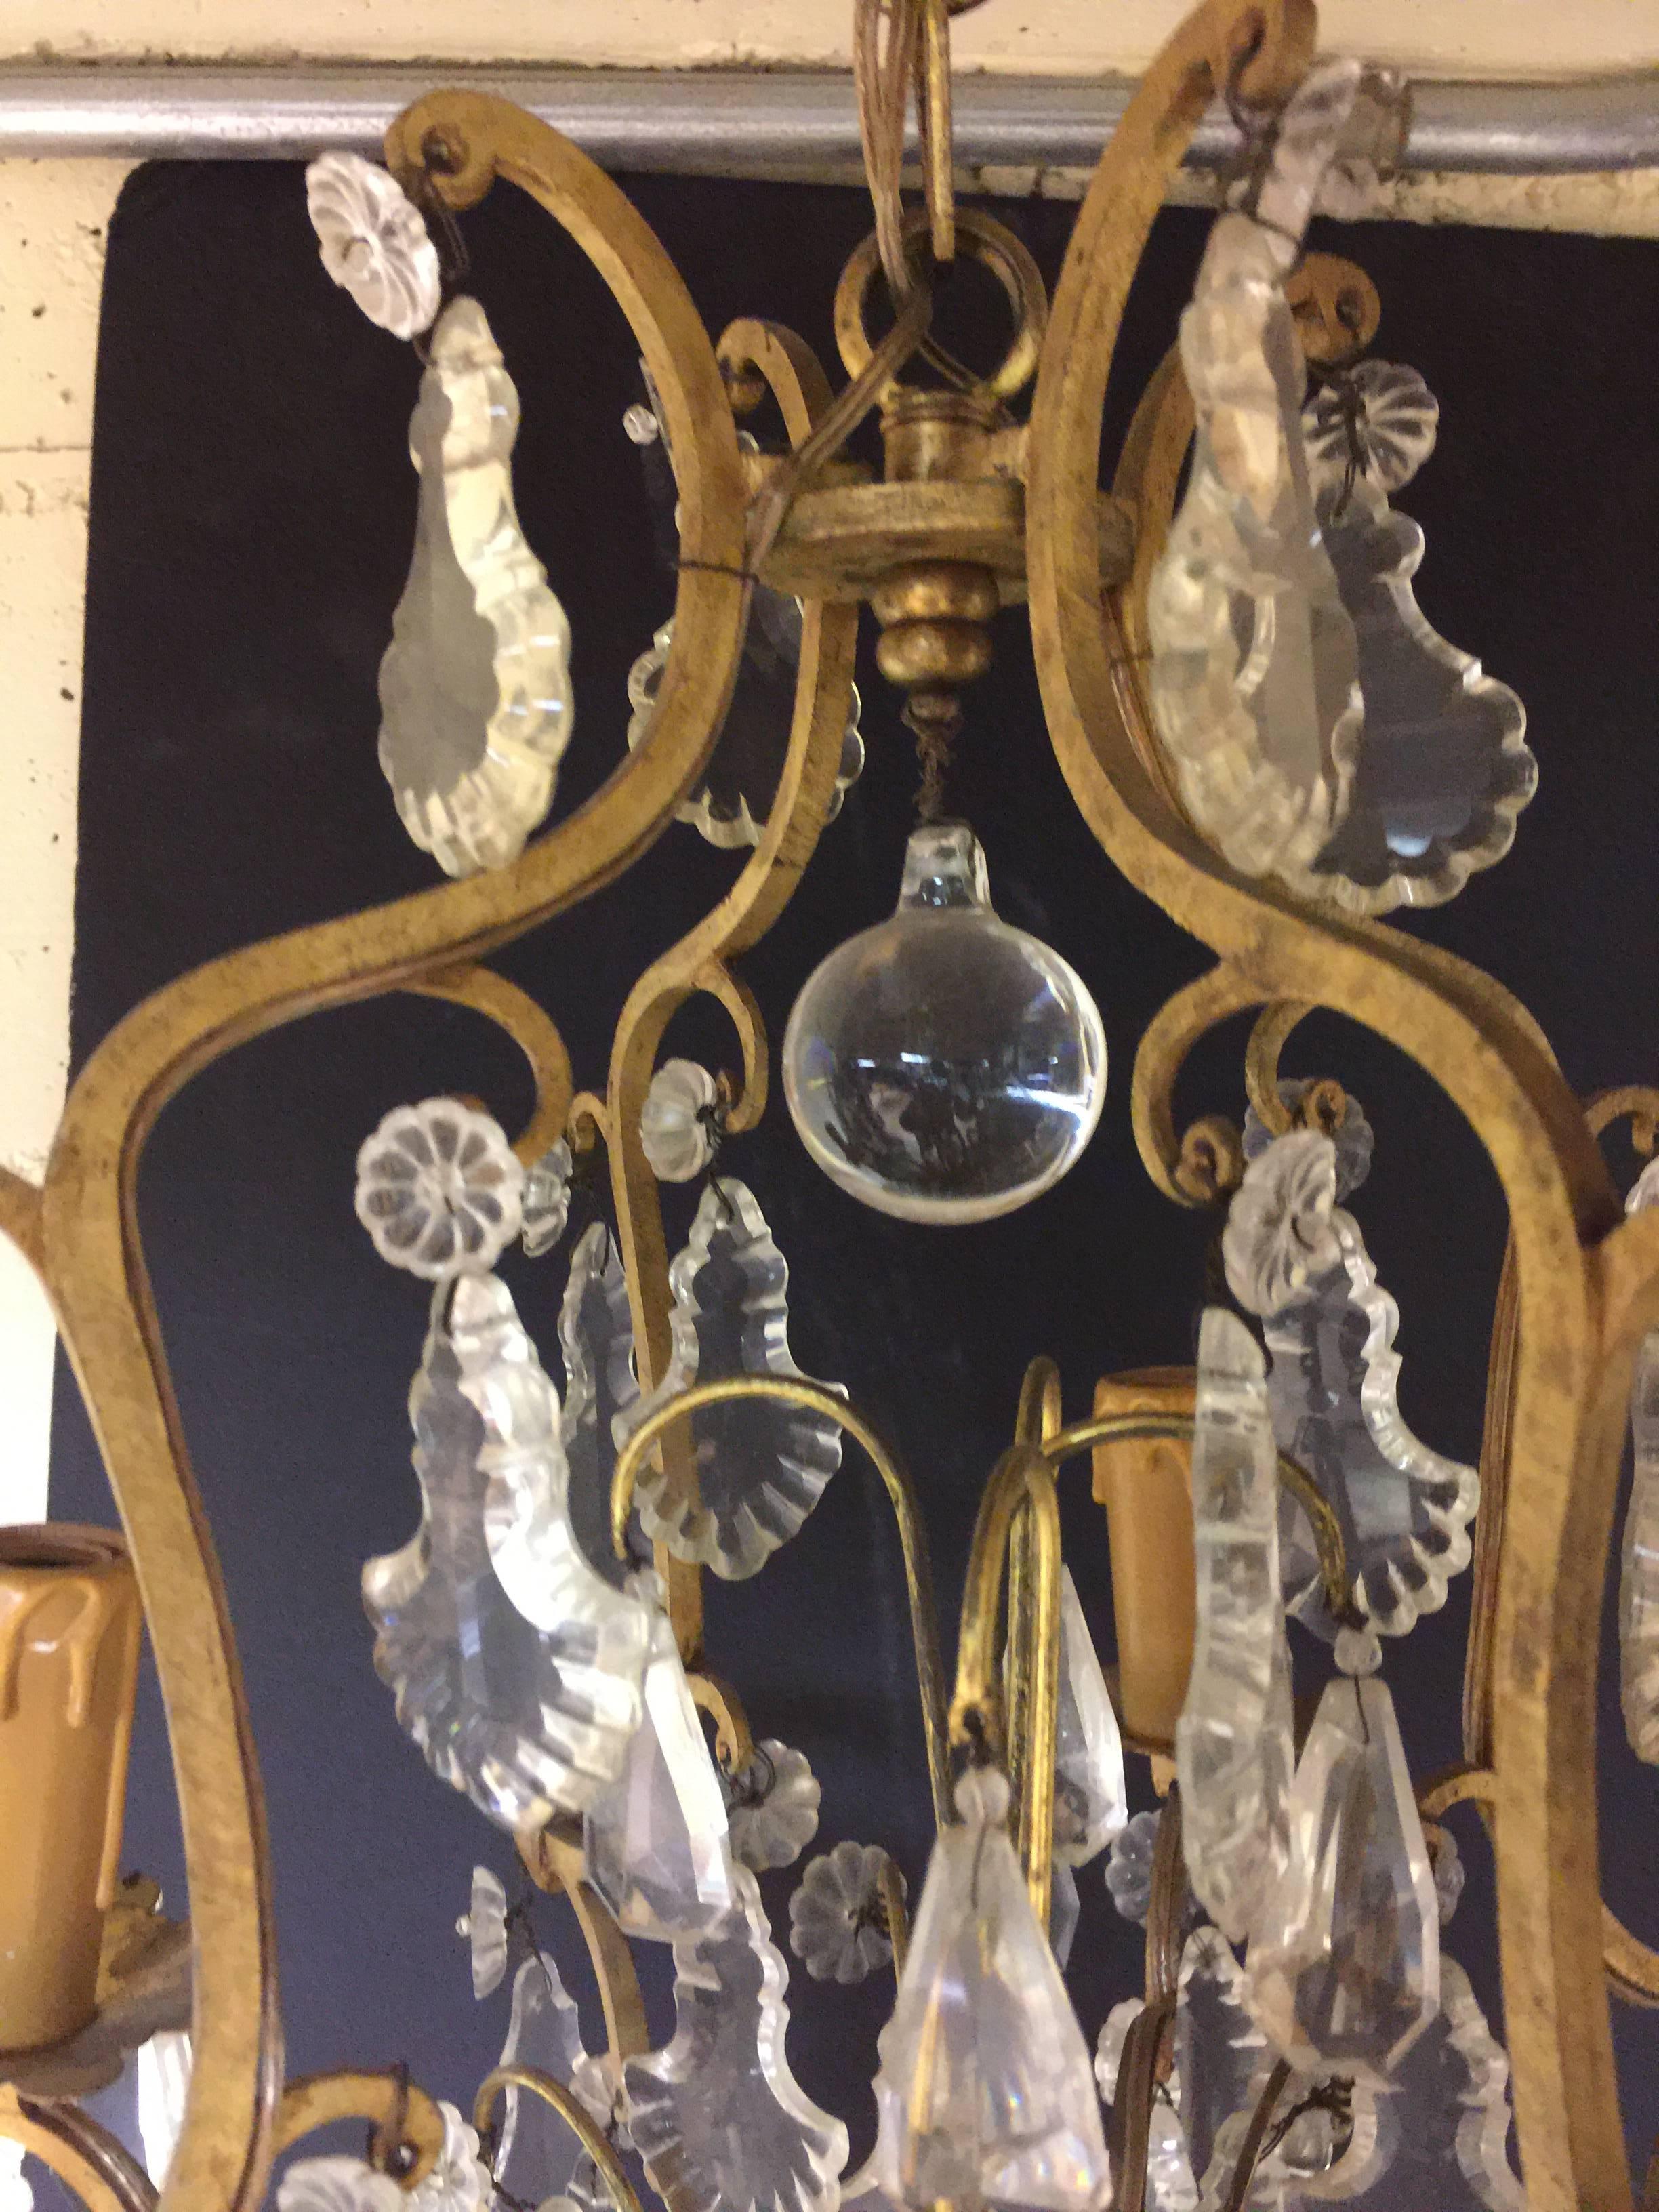 Late 19th-early 20th century French crystal and bronze chandelier.
Needs to be wired.
24'' without 8